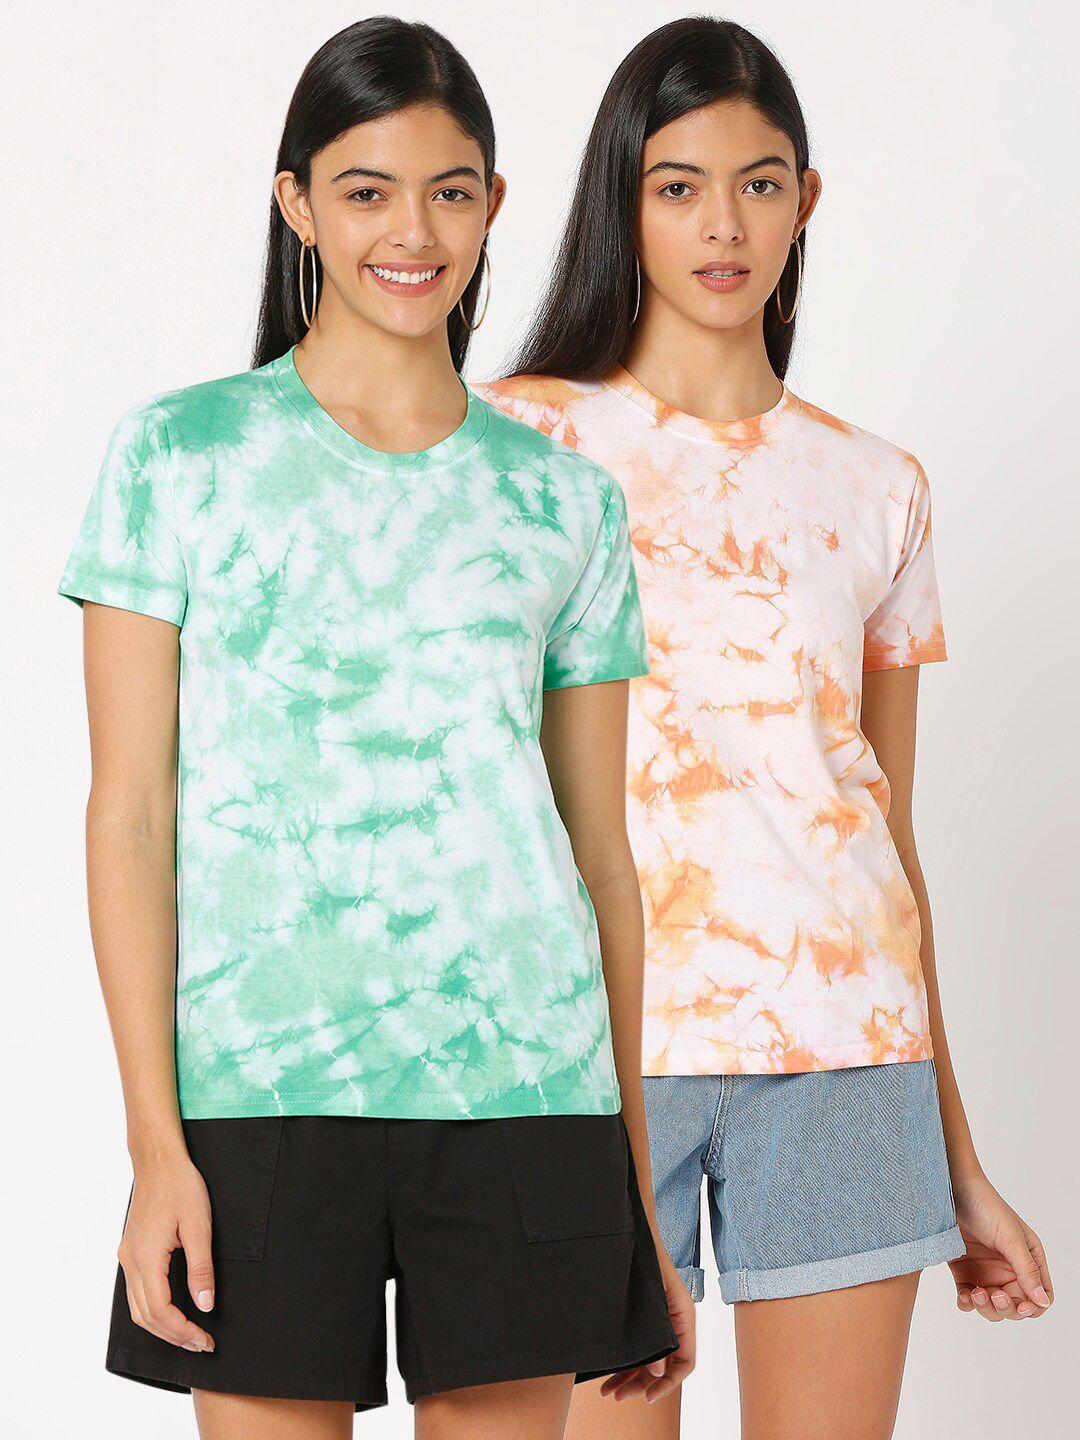 smarty pants women white & green tie and dye 2 dyed v-neck t-shirt